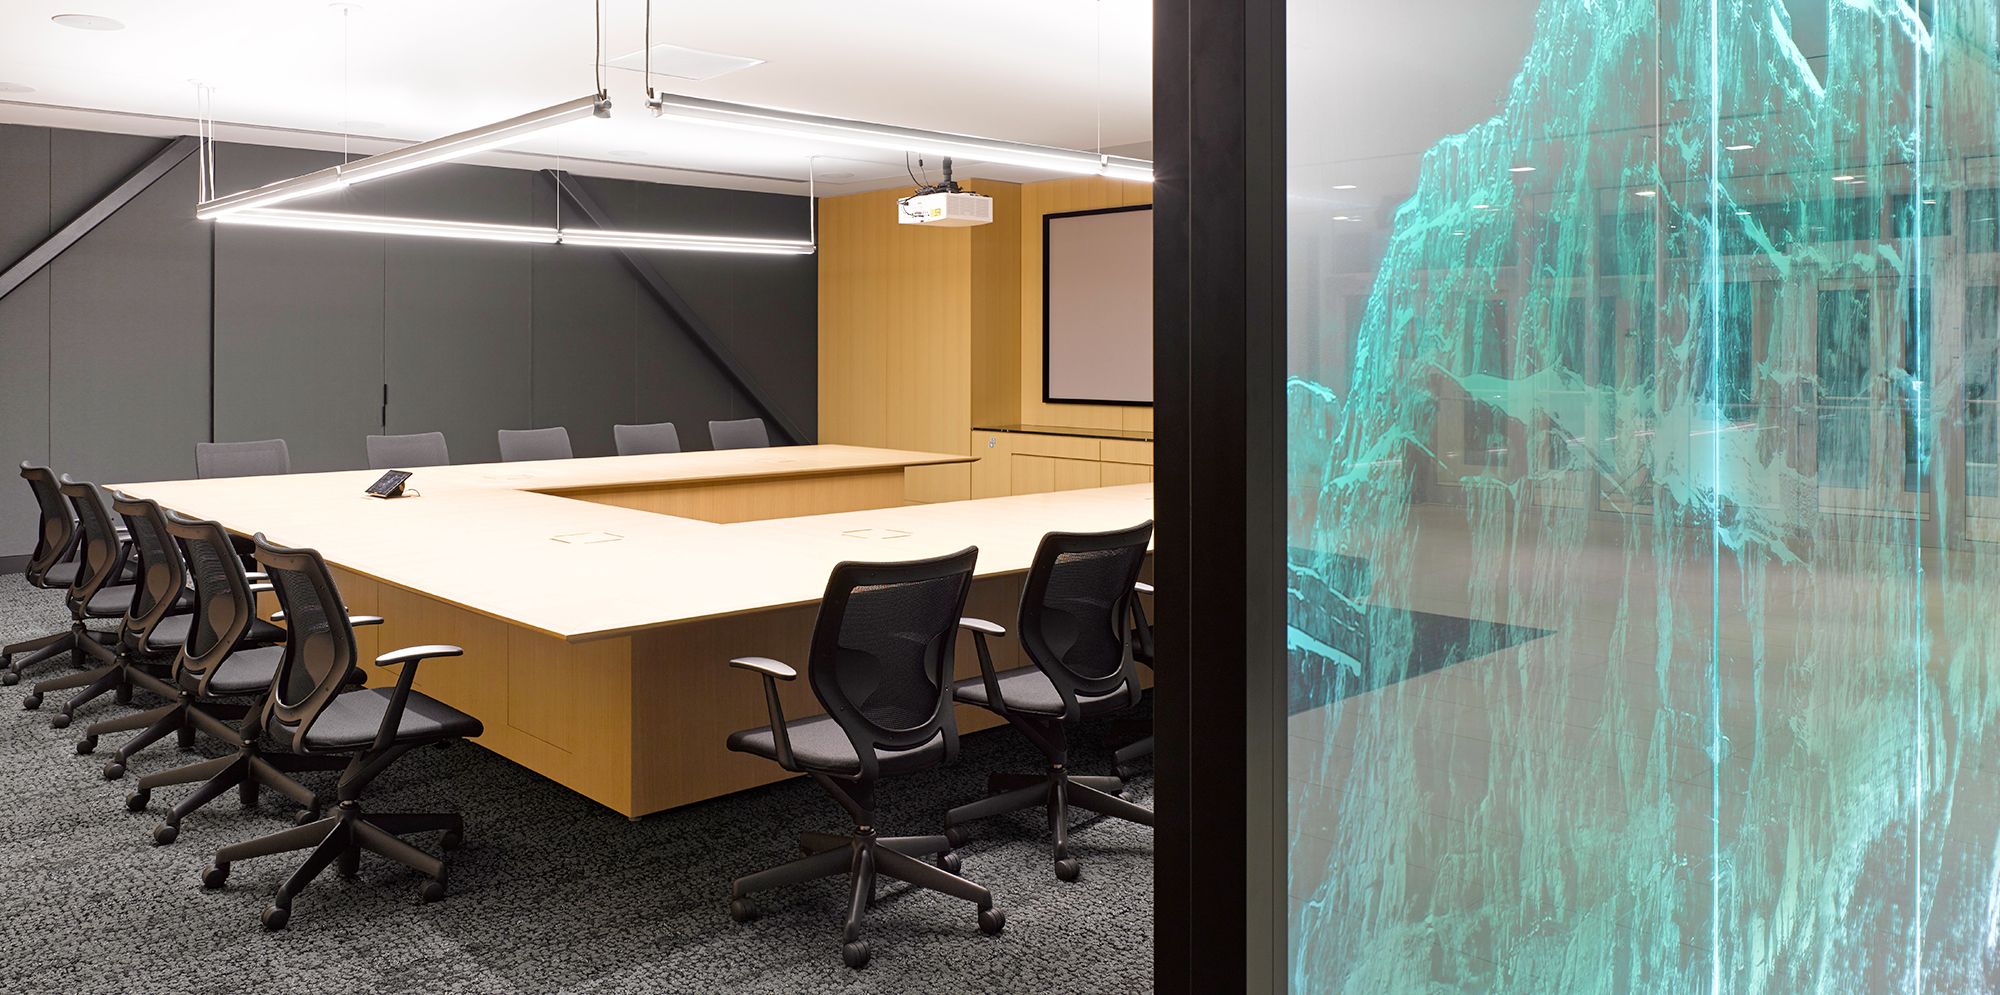 Conference room inside CMG Headquarters, designed by IBI Group